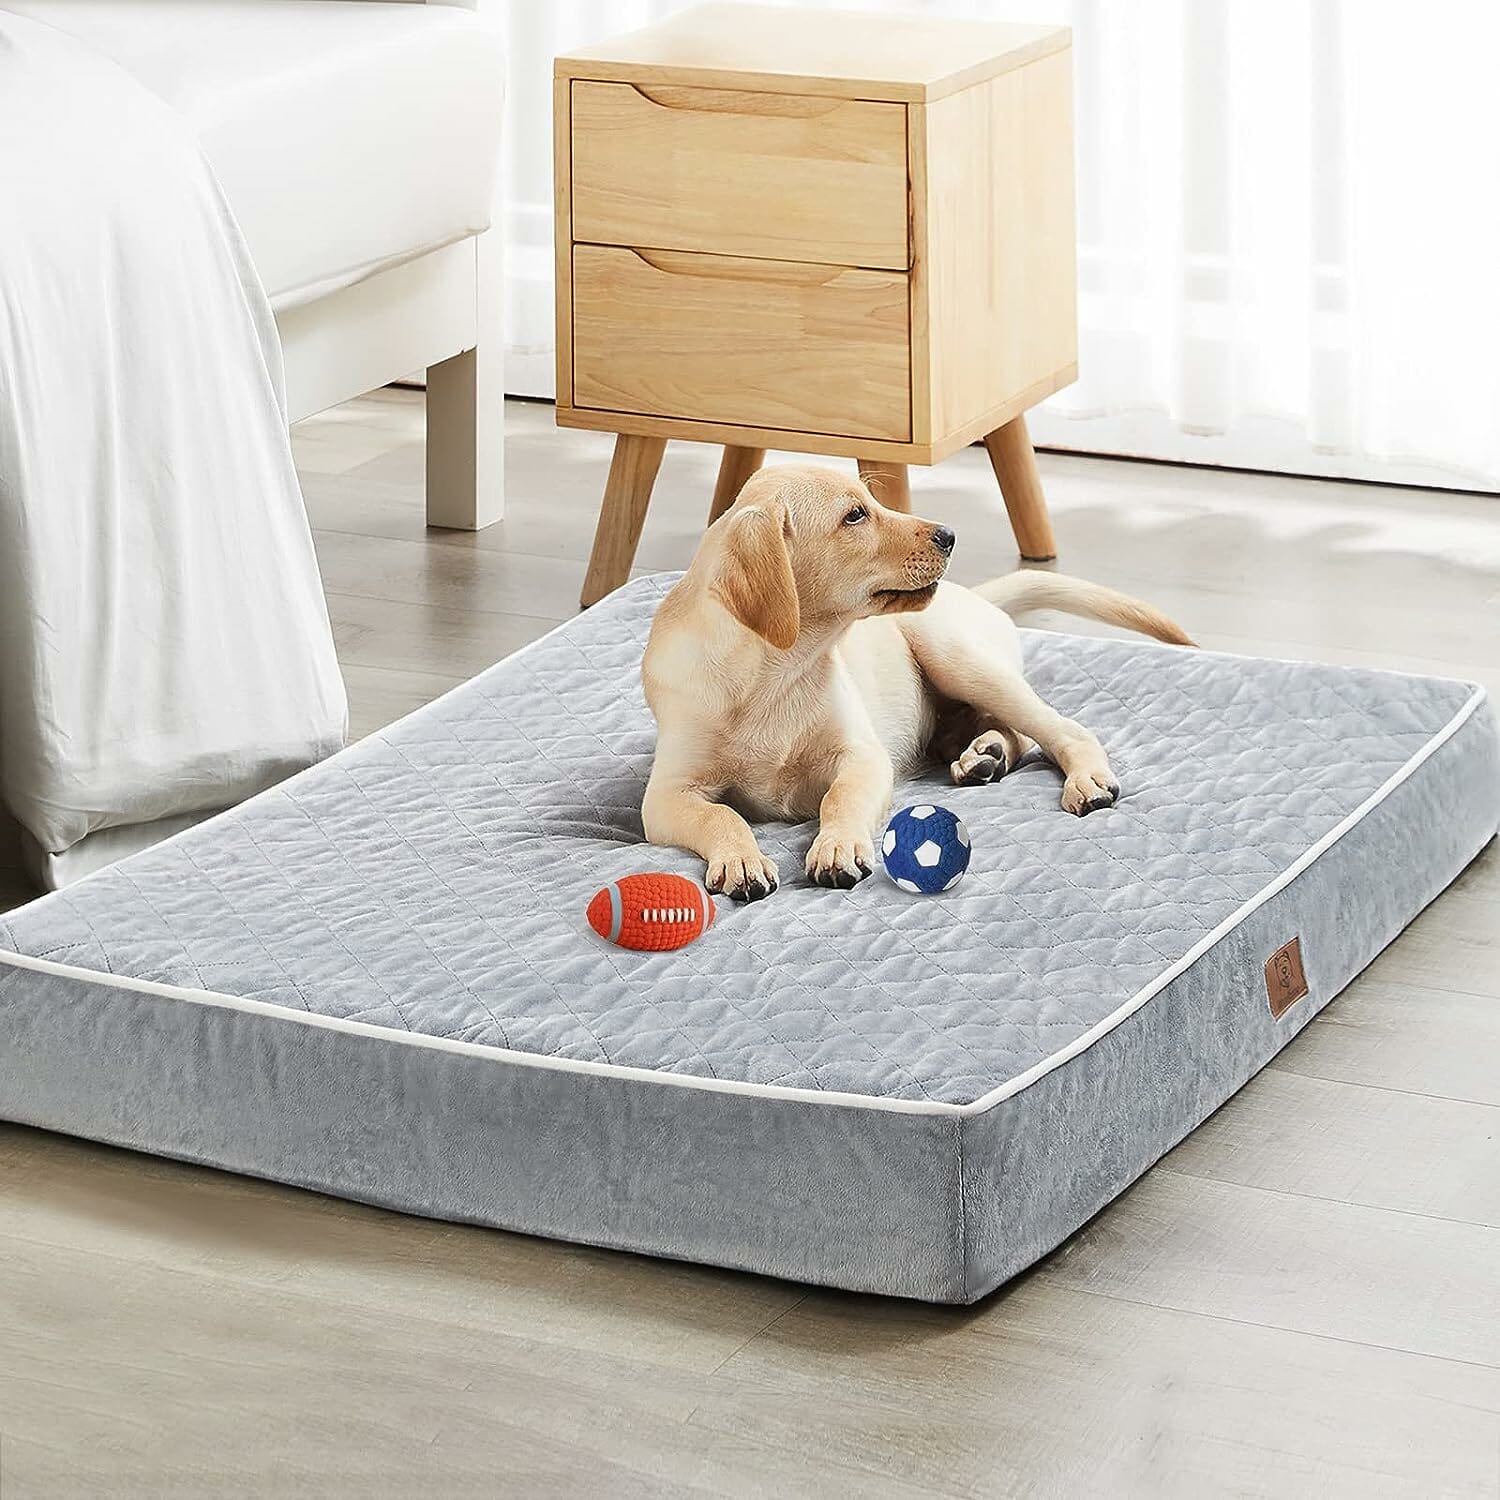 WNPETHOME Orthopedic Dog Beds Review